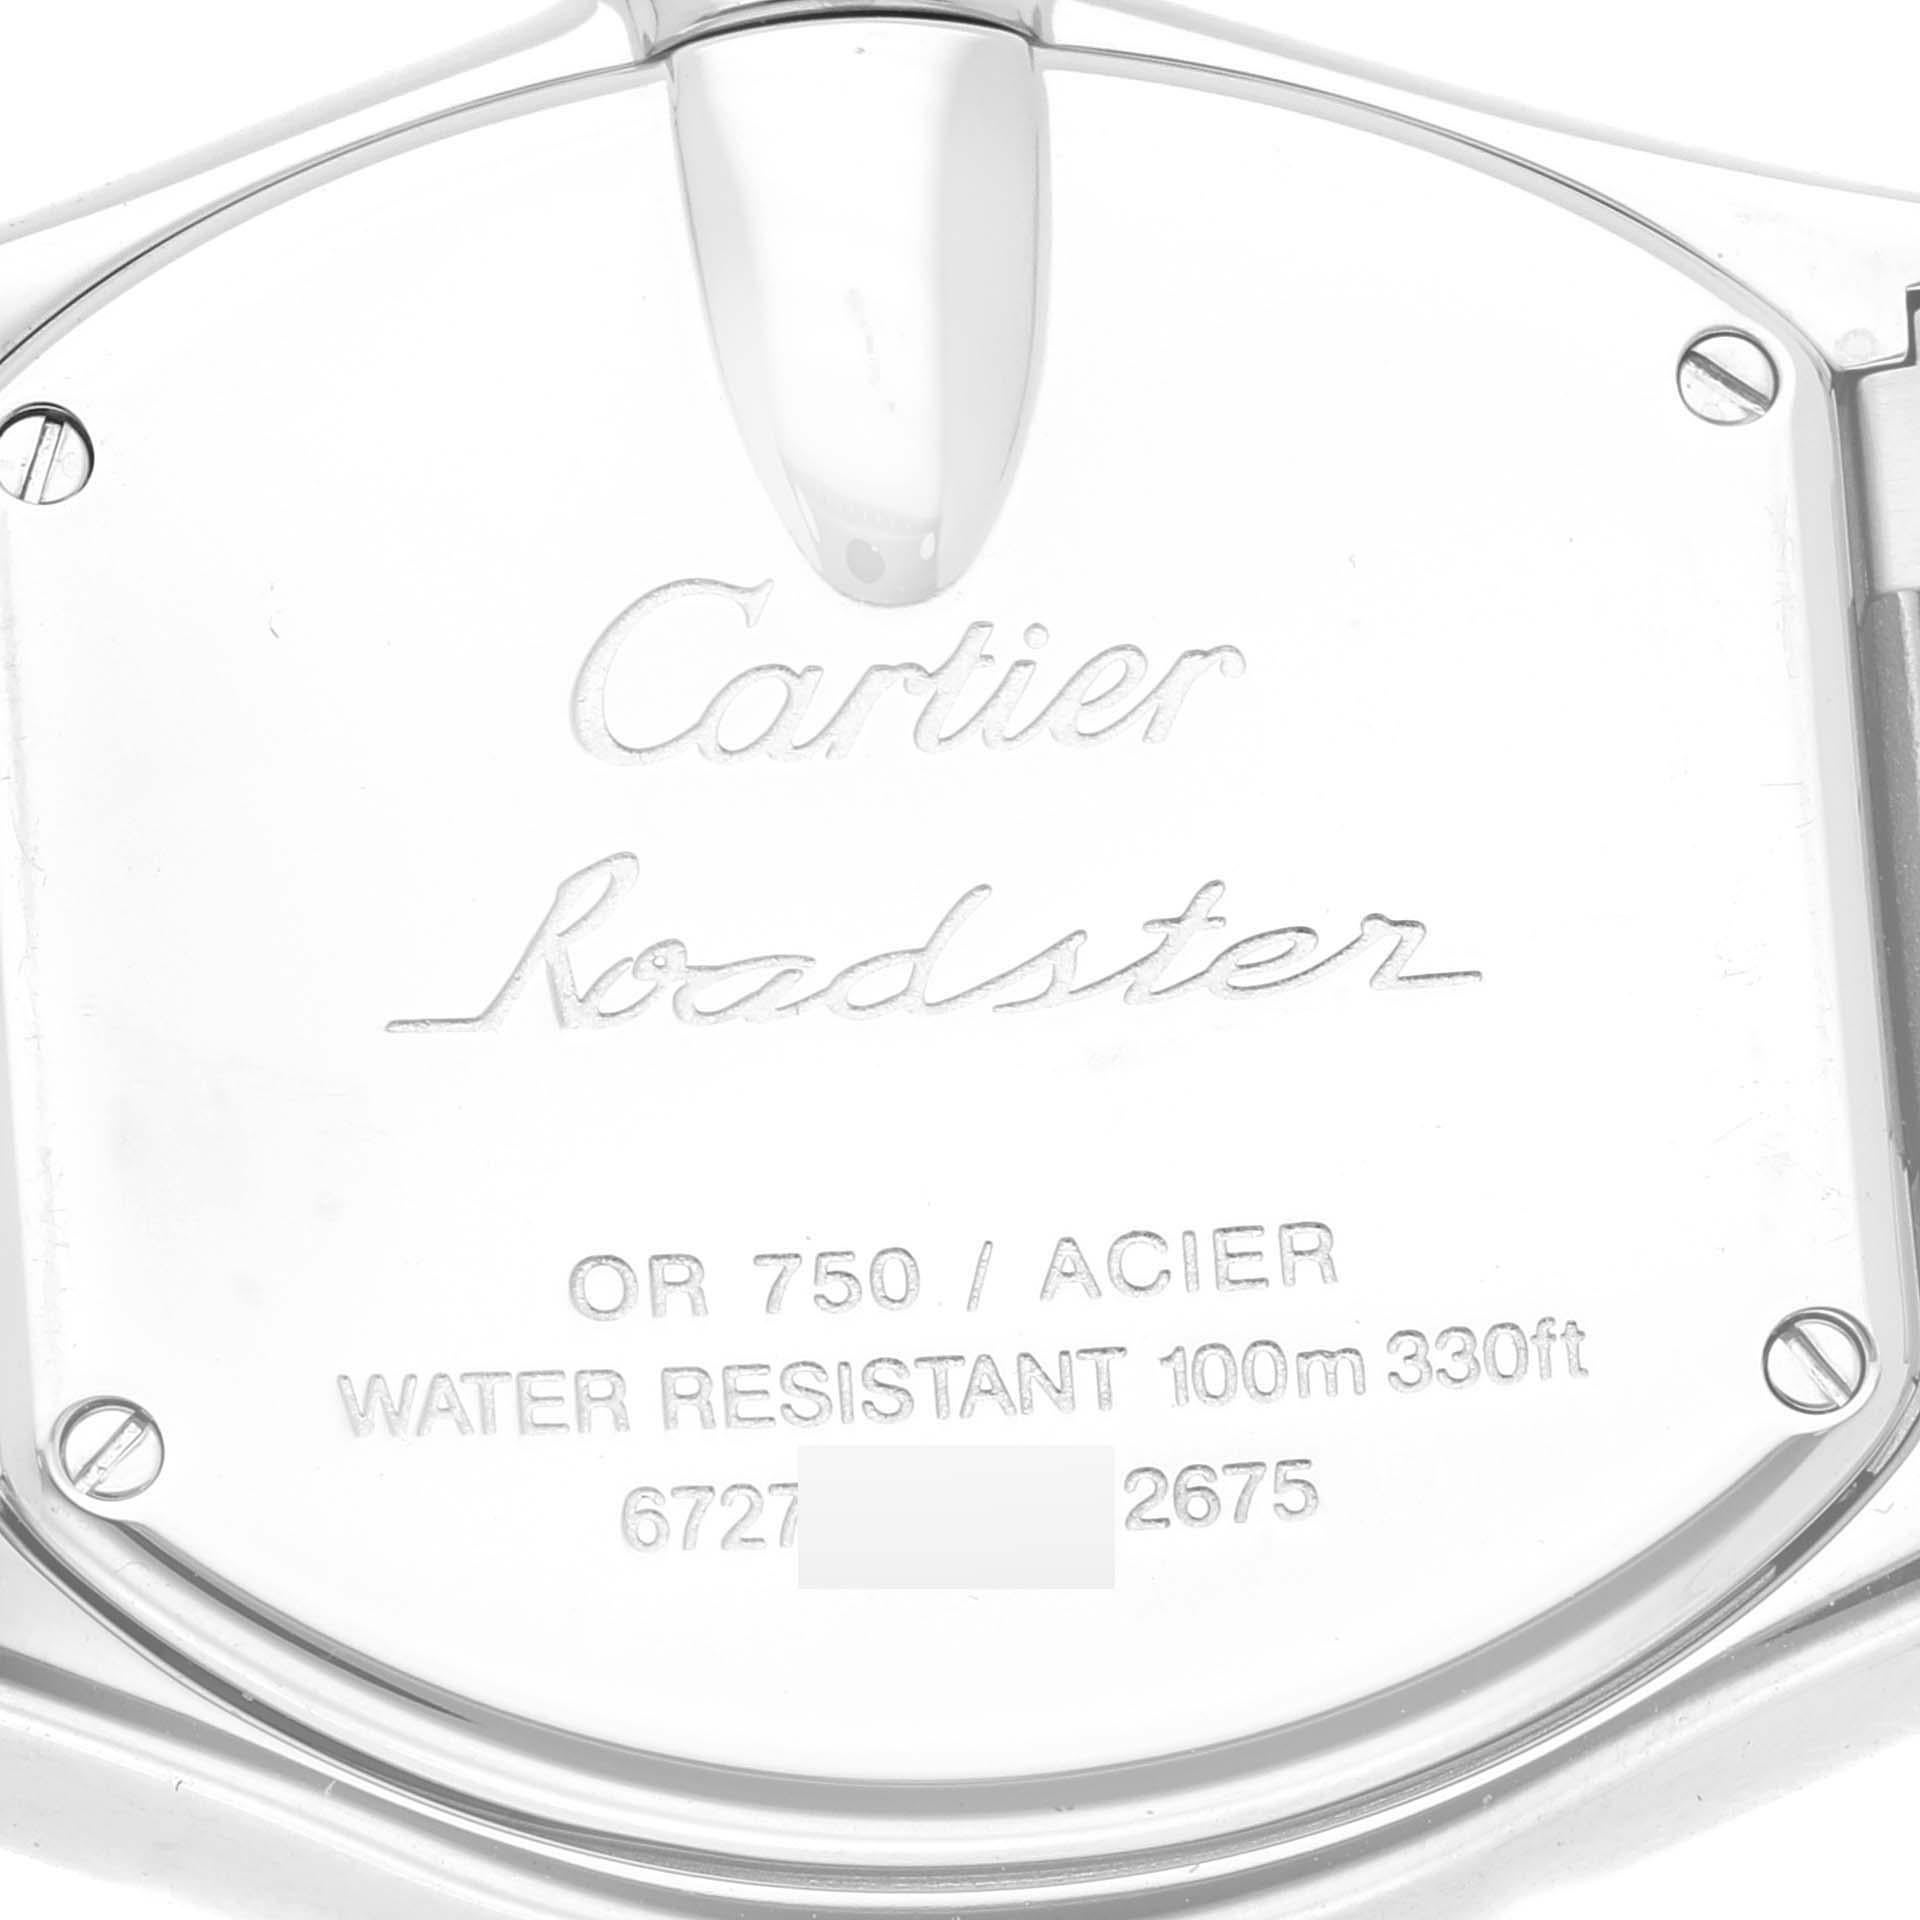 Cartier Roadster Steel Yellow Gold Ladies Watch W62026Y4 For Sale 2